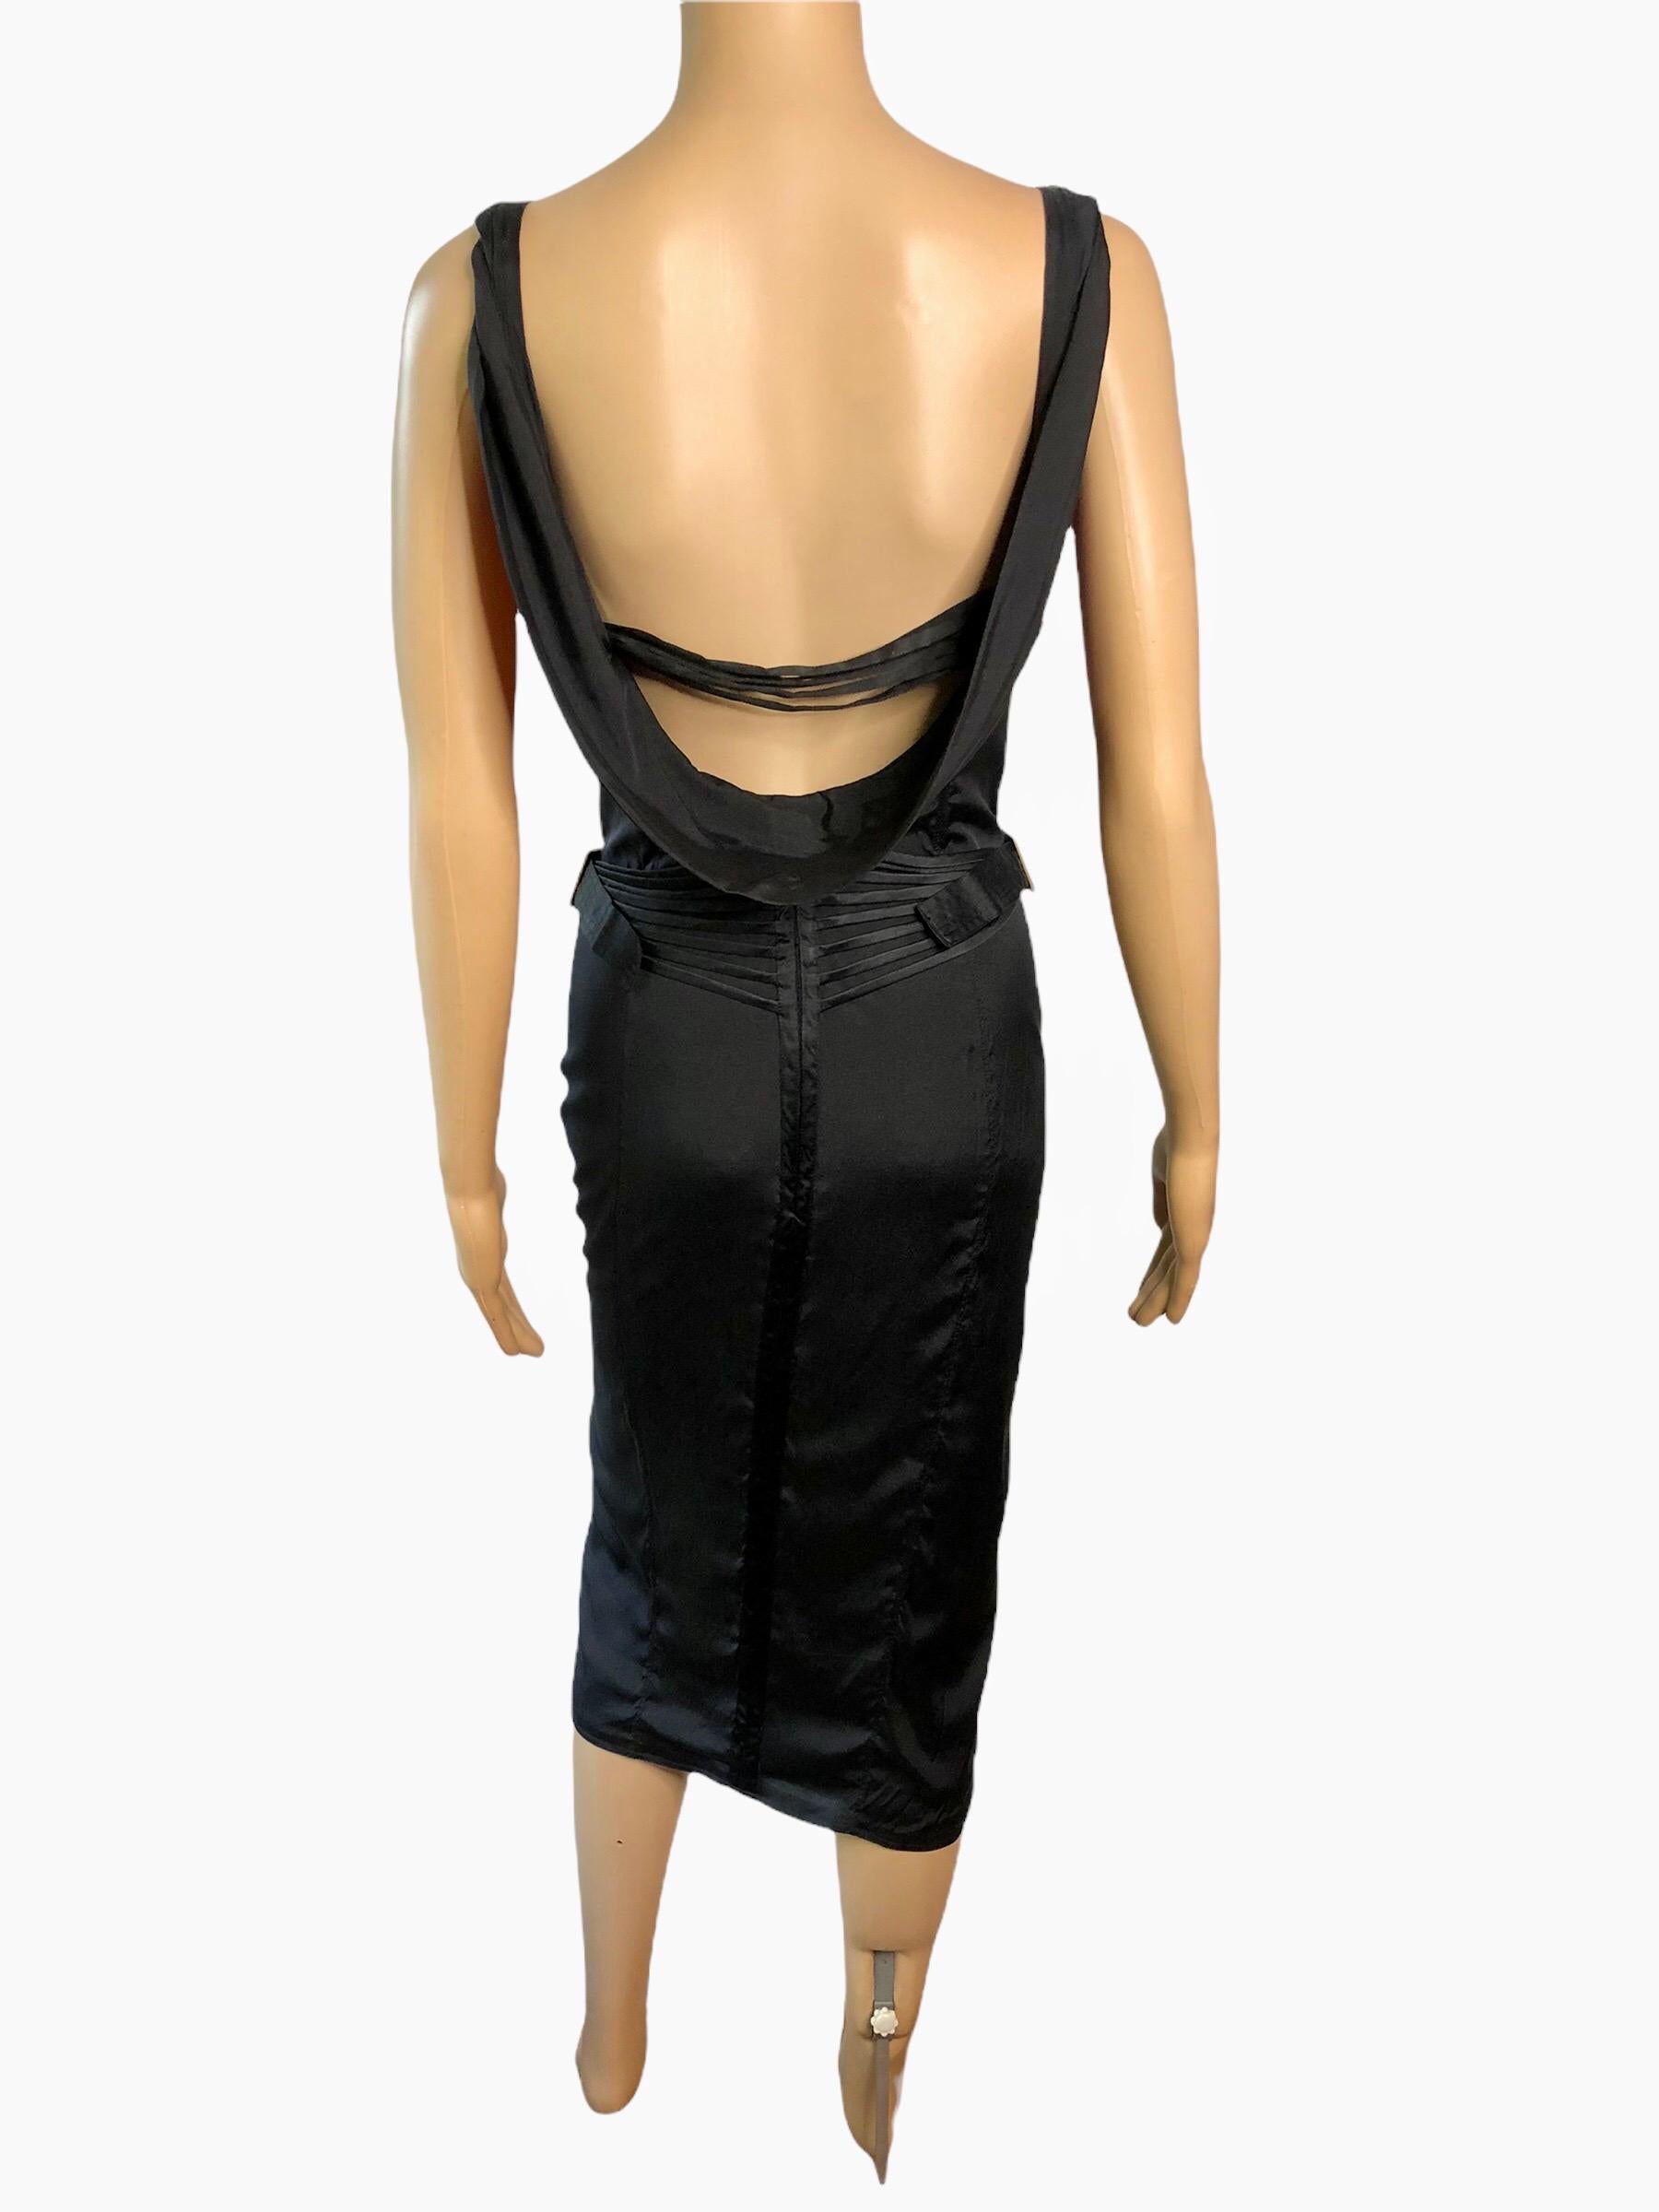 Tom Ford for Gucci F/W 2003 Runway Bustier Corset Silk Black Dress S/M

Tom Ford for Gucci silk black dress with structured bust featuring concealed corset bodice, hook-and-eye closures at center front and concealed zip closure at center back.